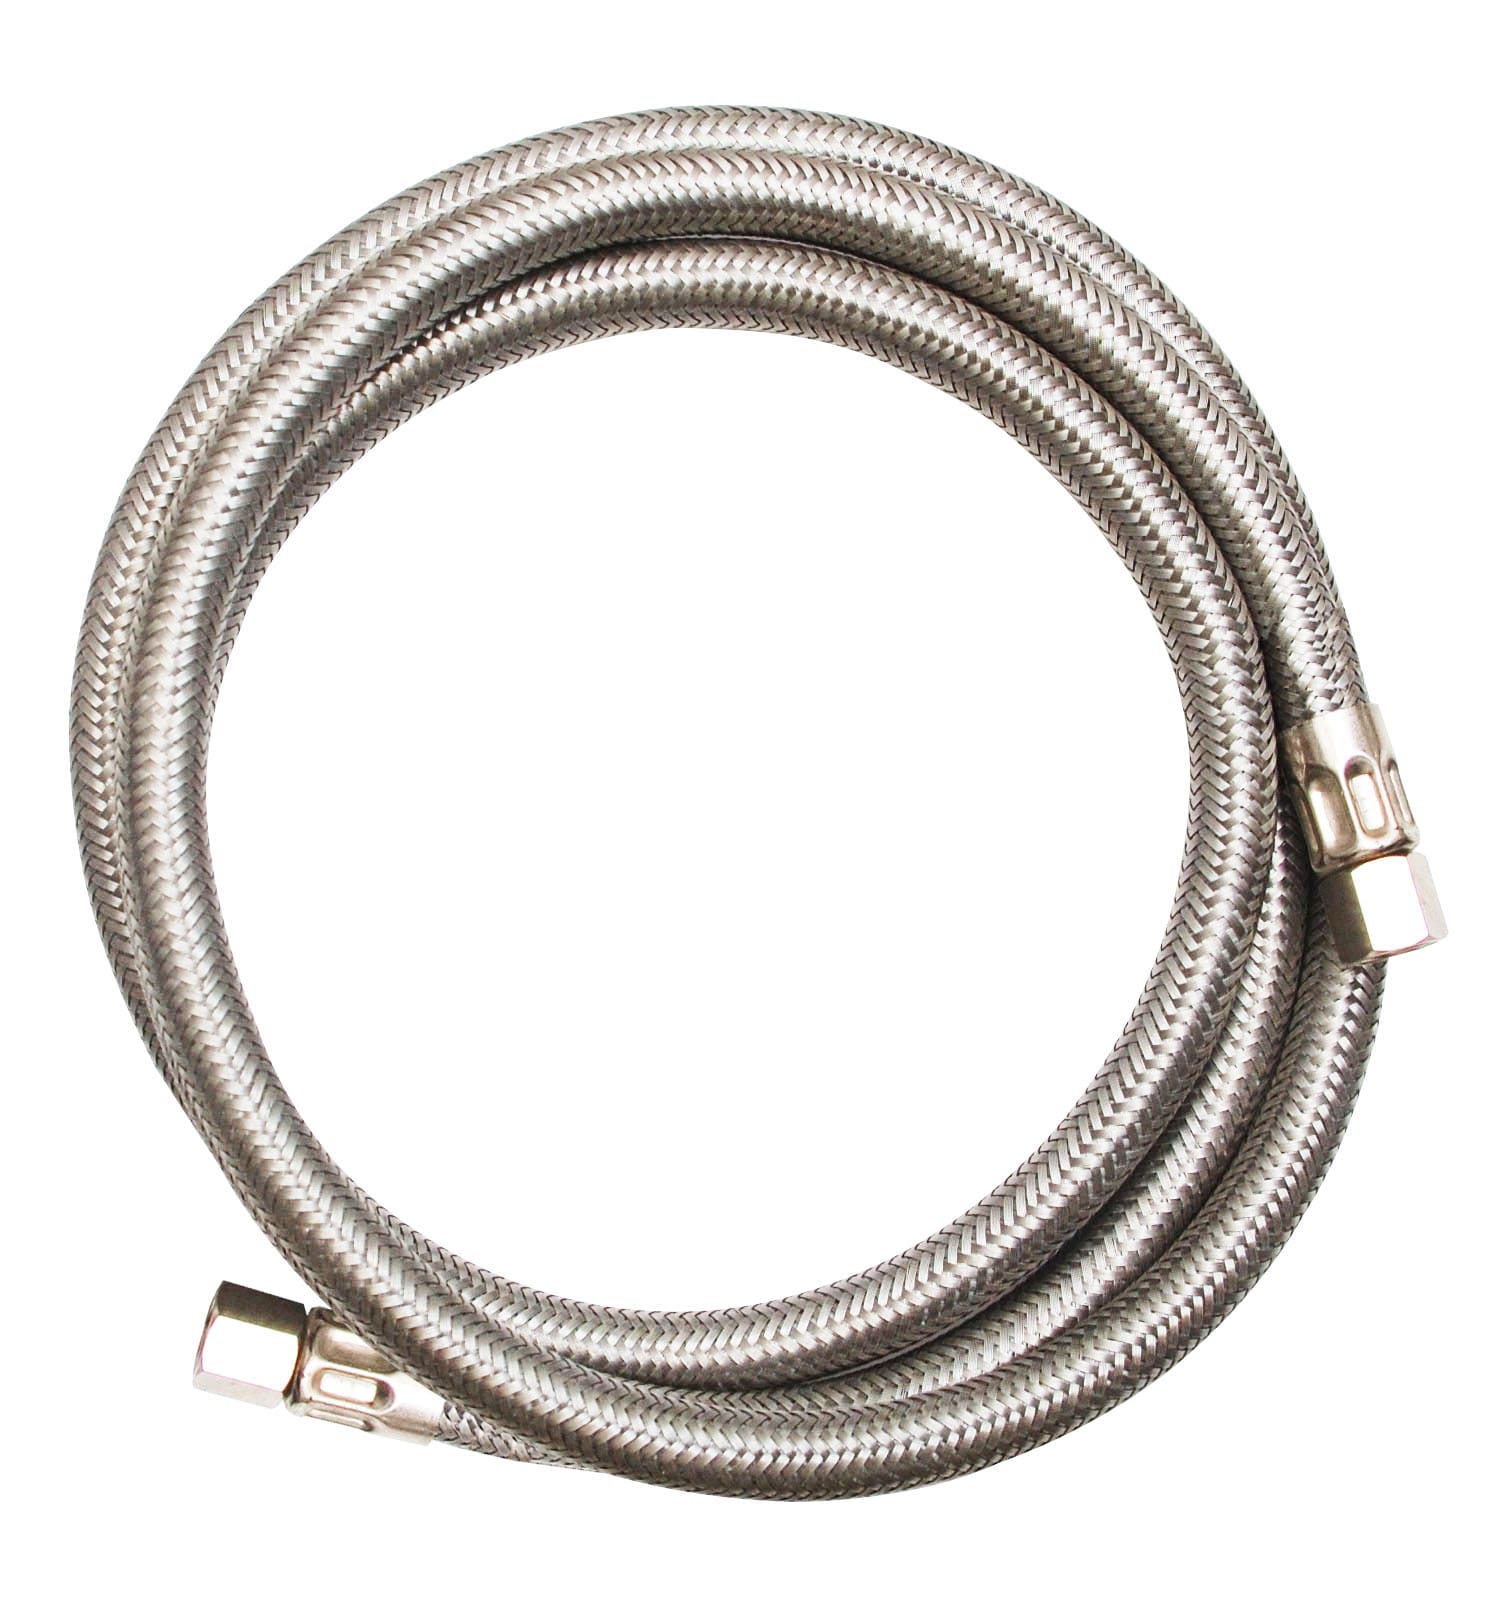  Eastman 48389, 10 Foot Ice Maker Connector, 1/4 Inch  Compression, Flexible Braided Stainless Steel Hose : Appliances